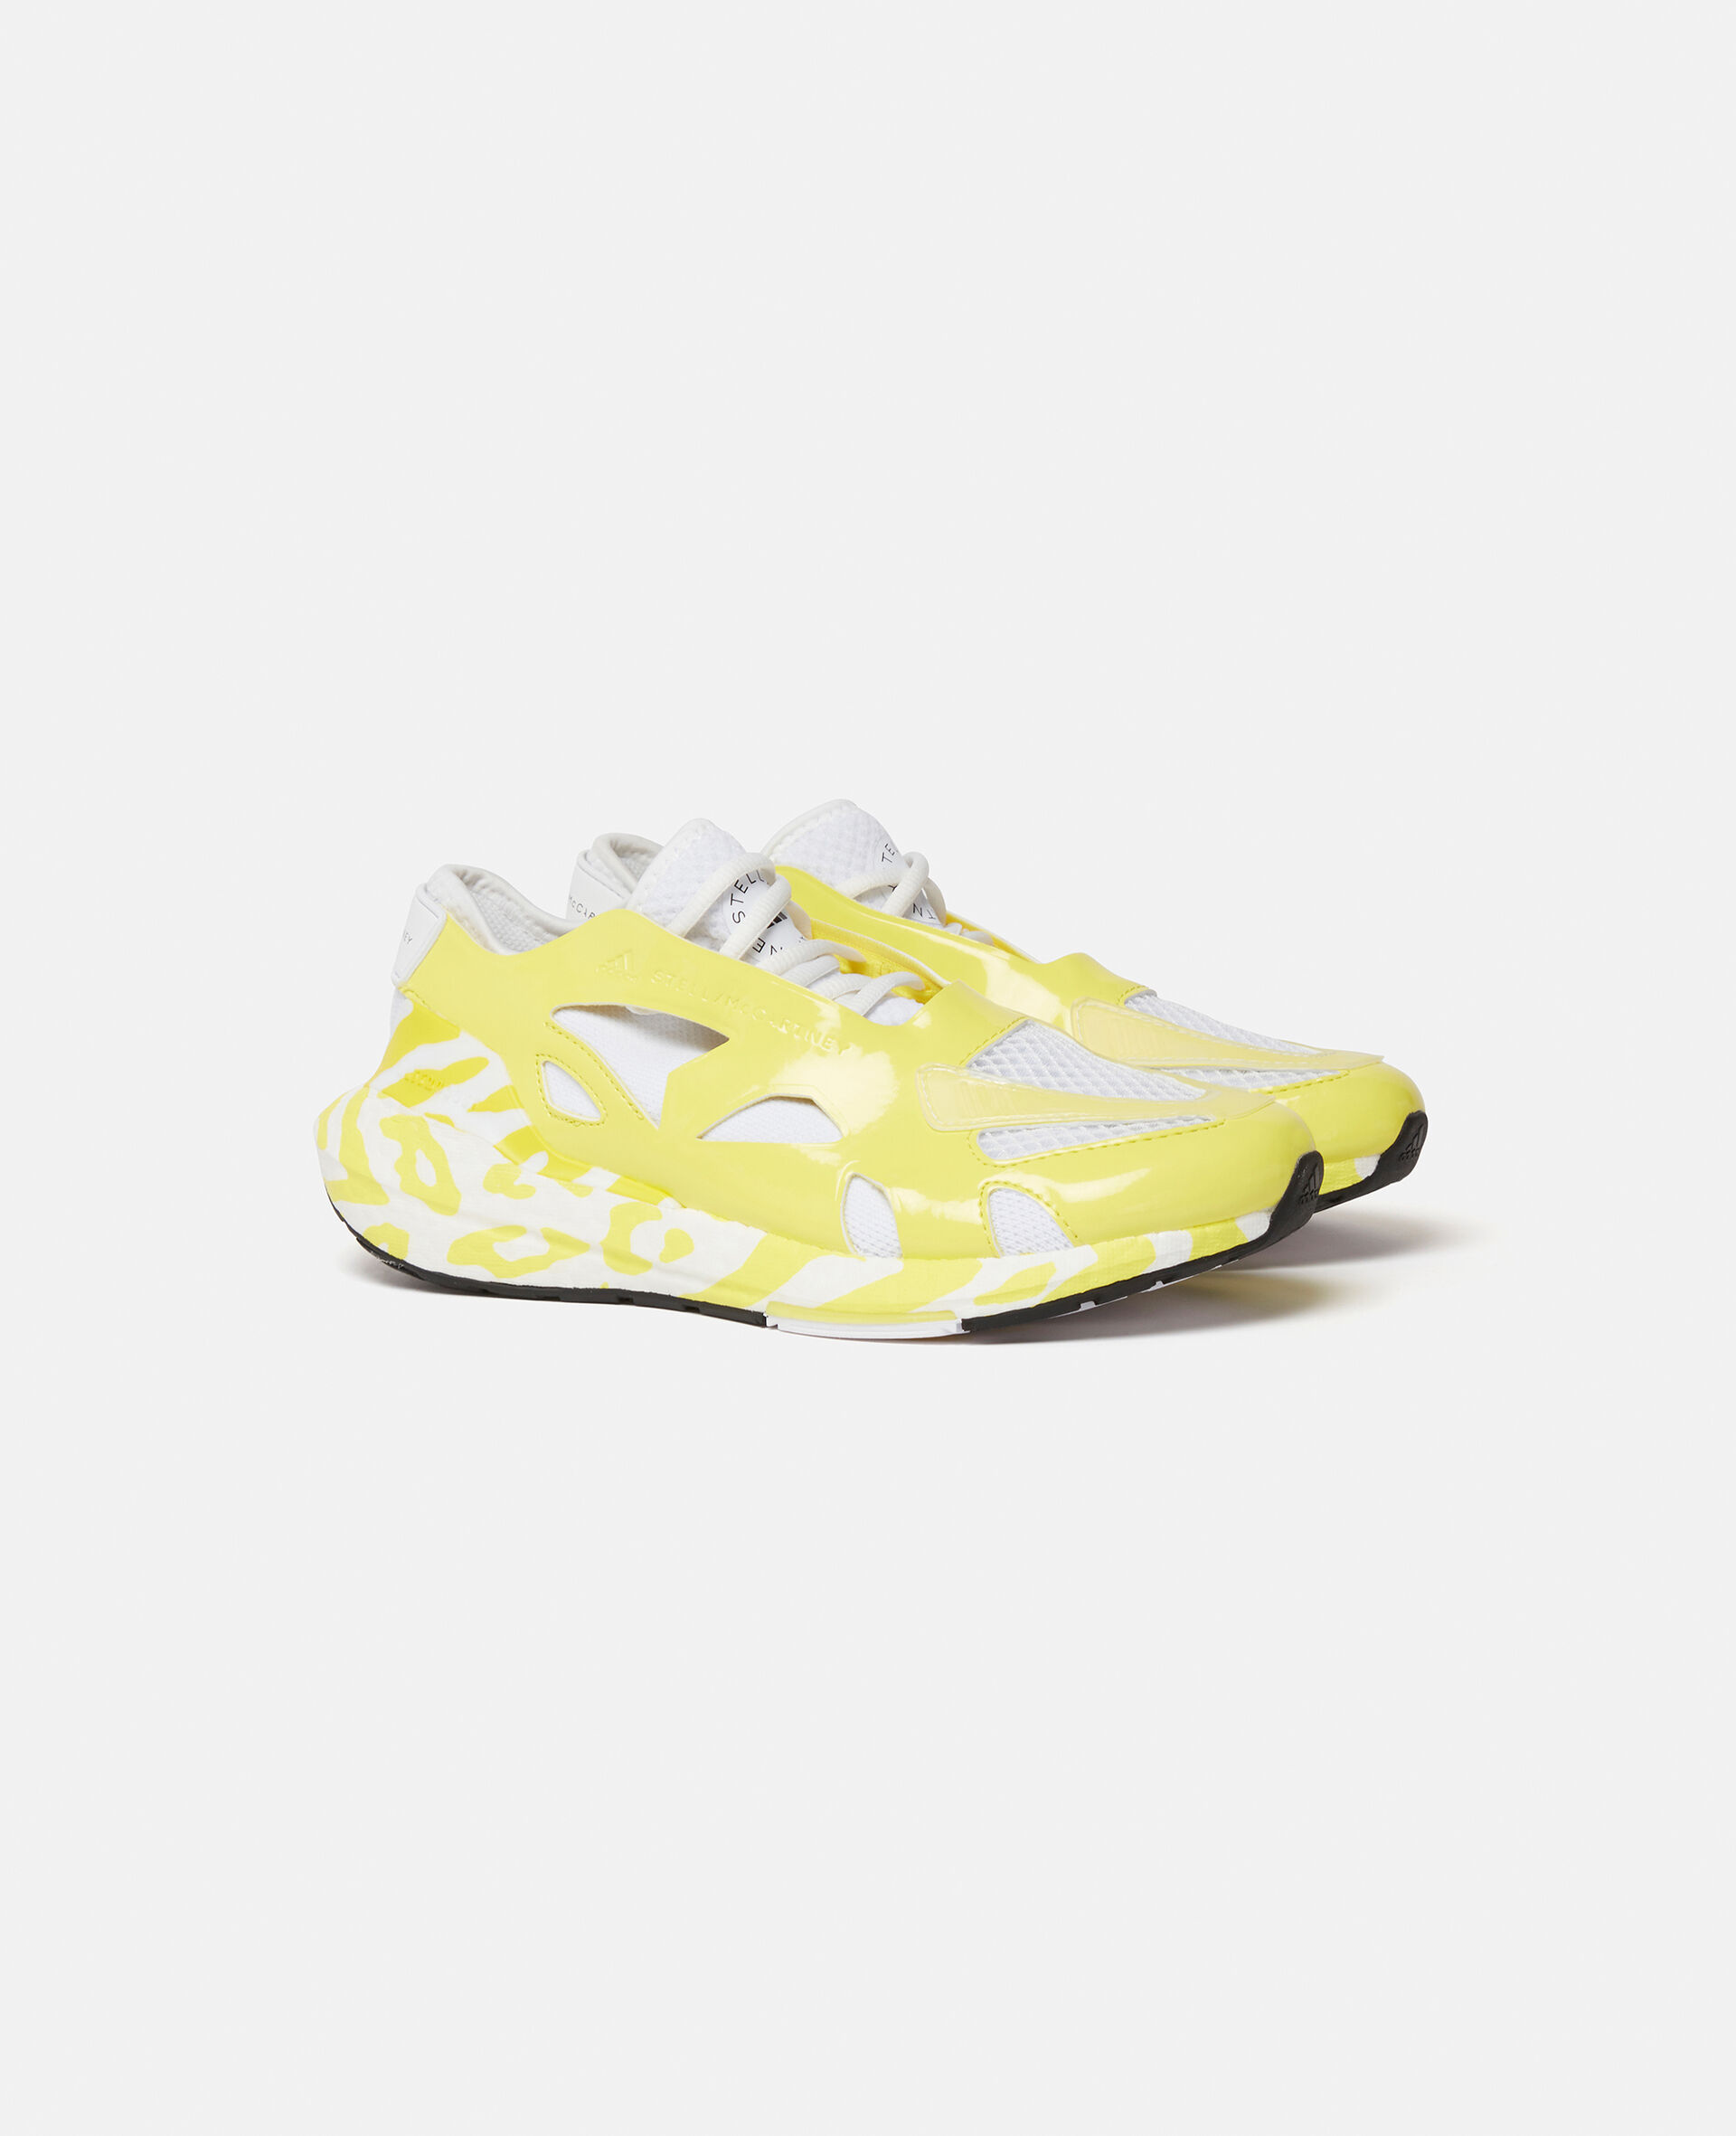 UltraBoost 22 Graphic Trainers-Yellow-large image number 1